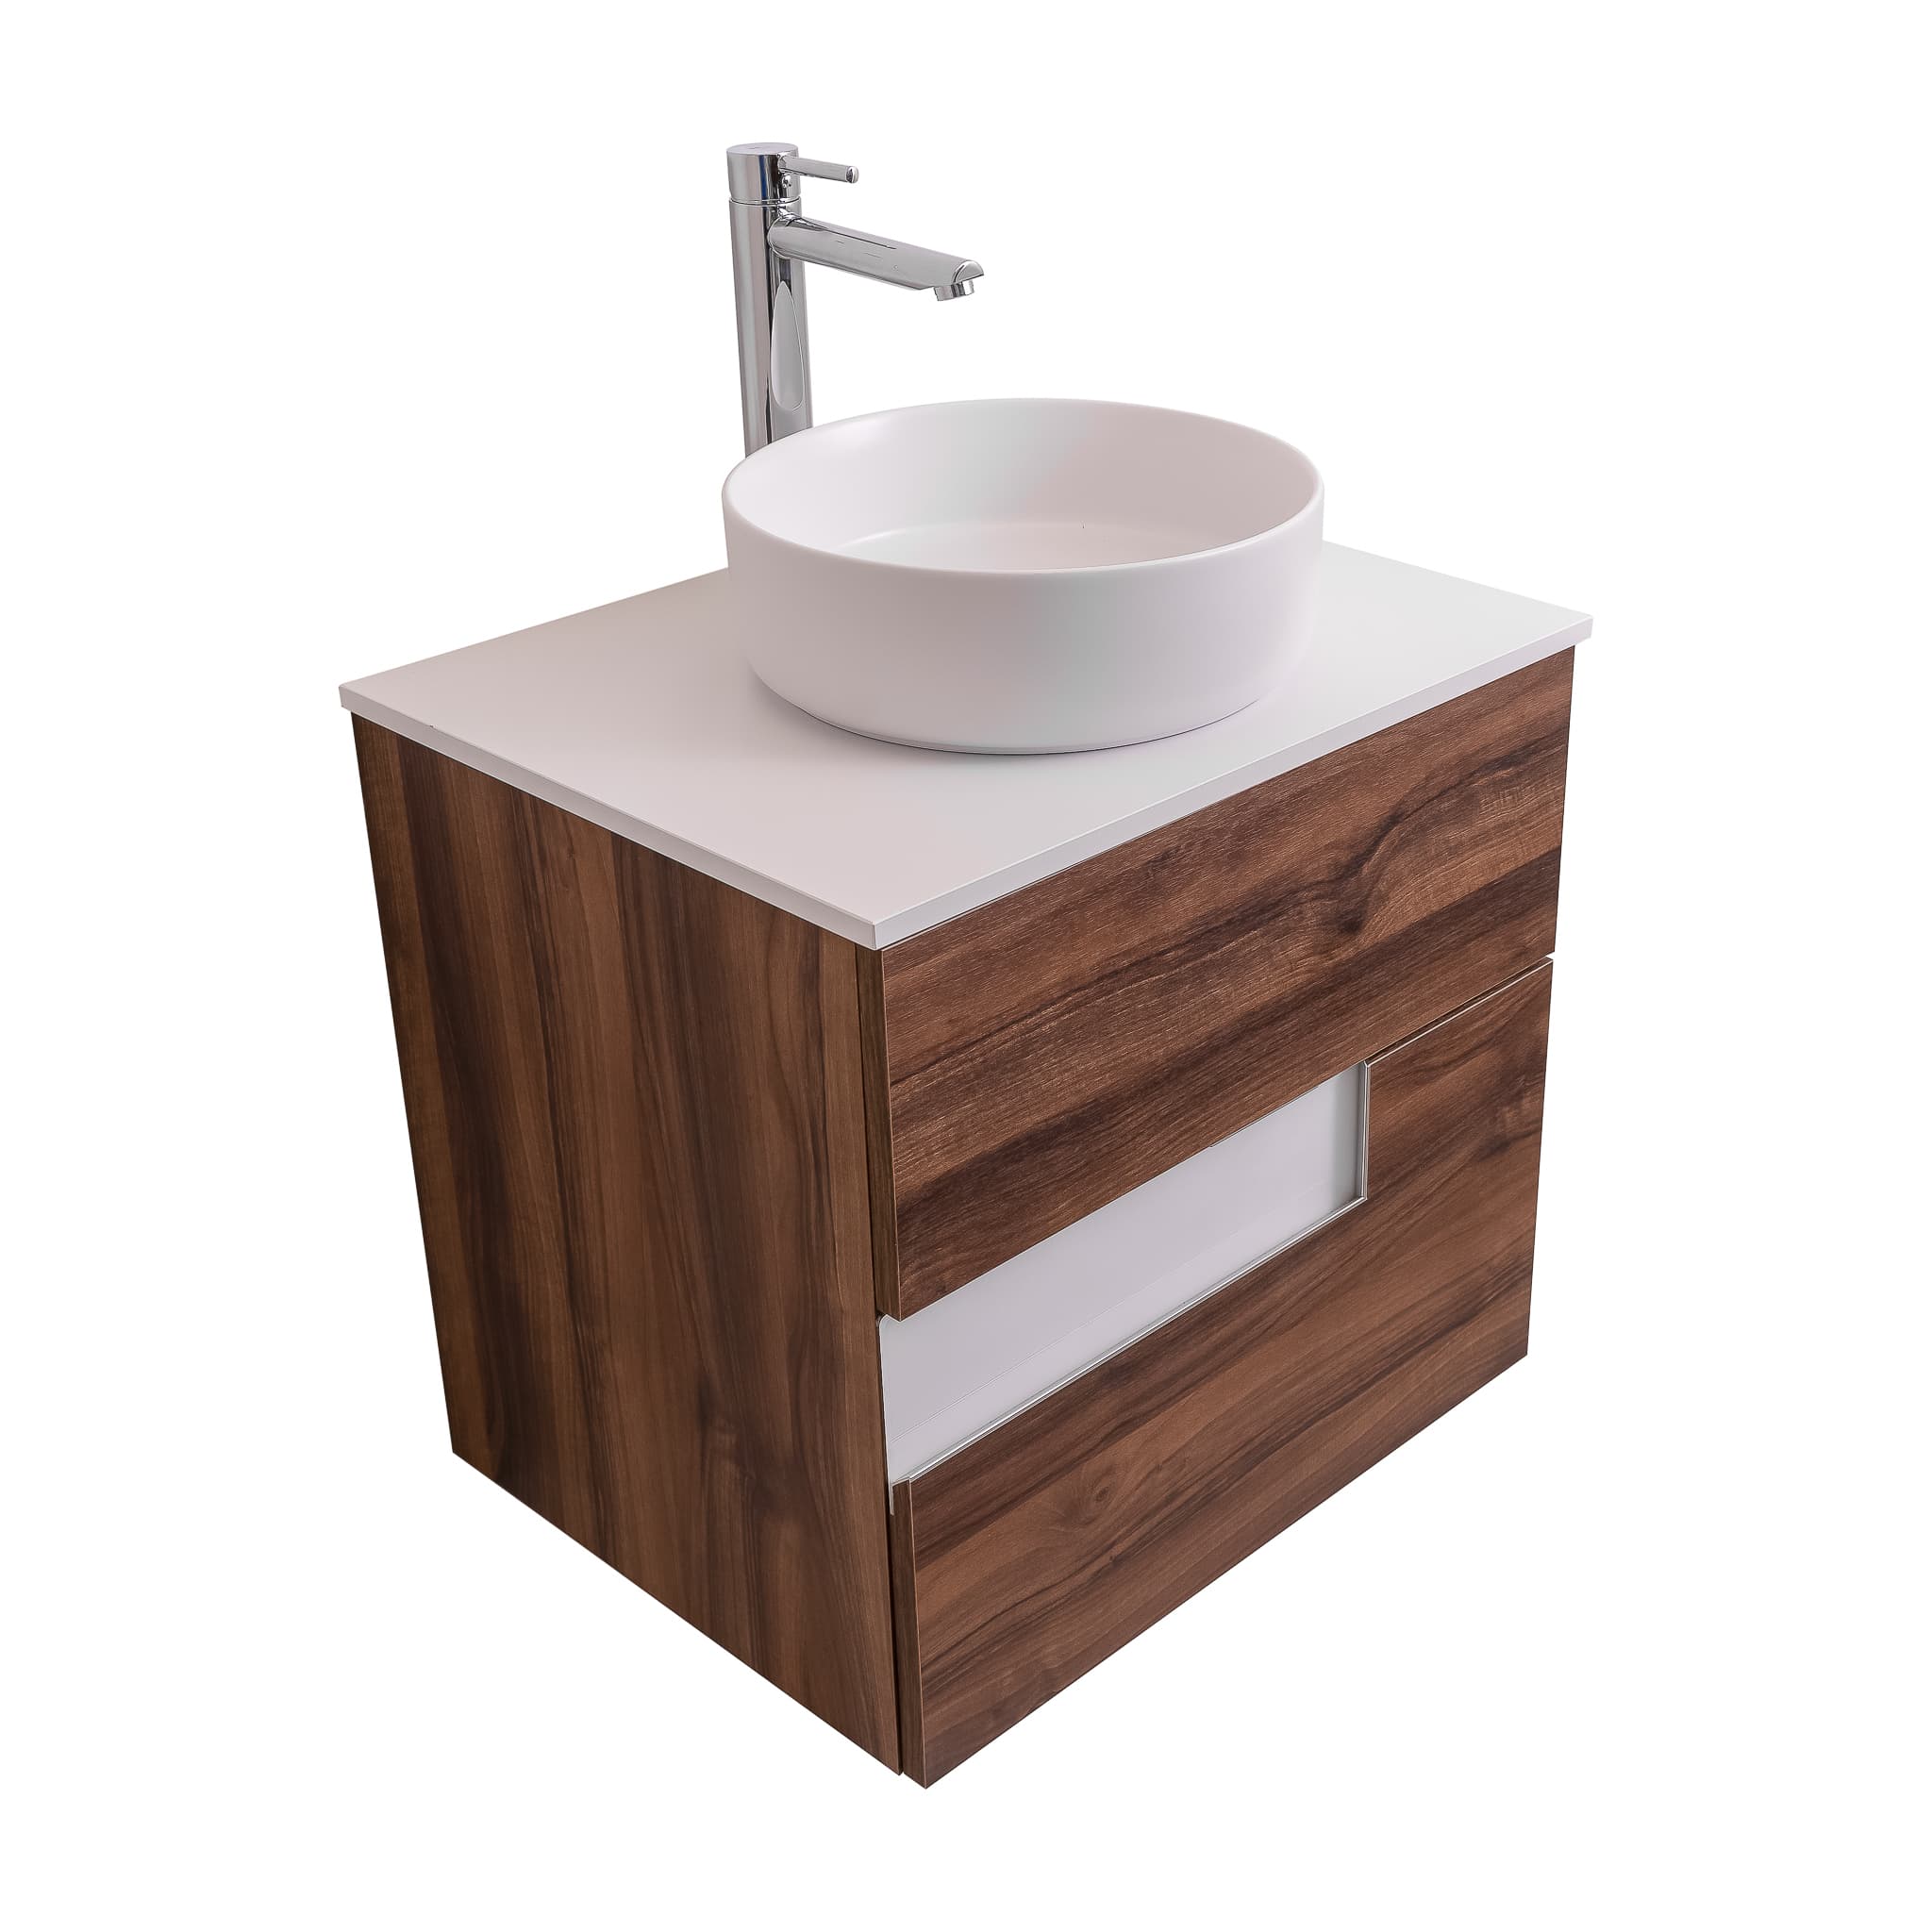 Vision 23.5 Valenti Medium Brown Wood Cabinet, Ares White Top And Ares White Ceramic Basin, Wall Mounted Modern Vanity Set